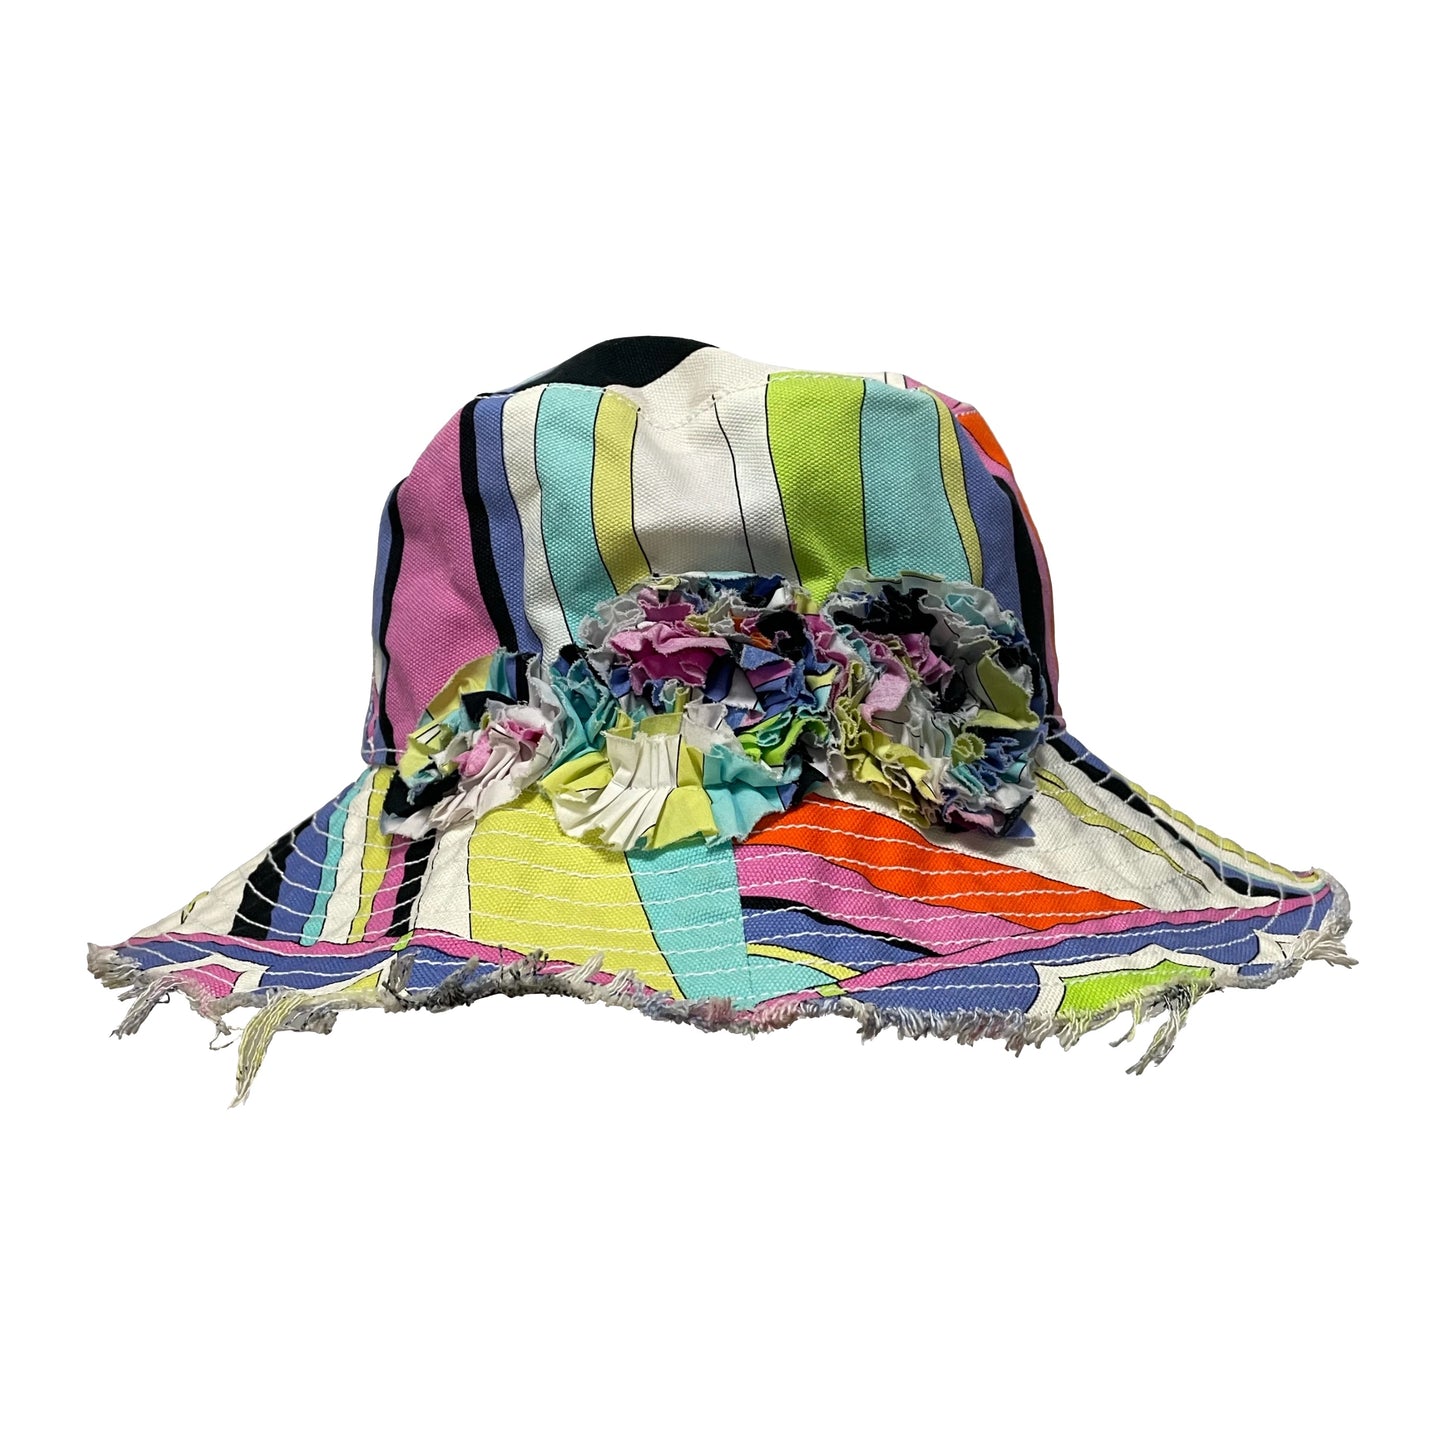 EMILIO PUCCI Spring Summer 2005 Bucket Hat with Flowers